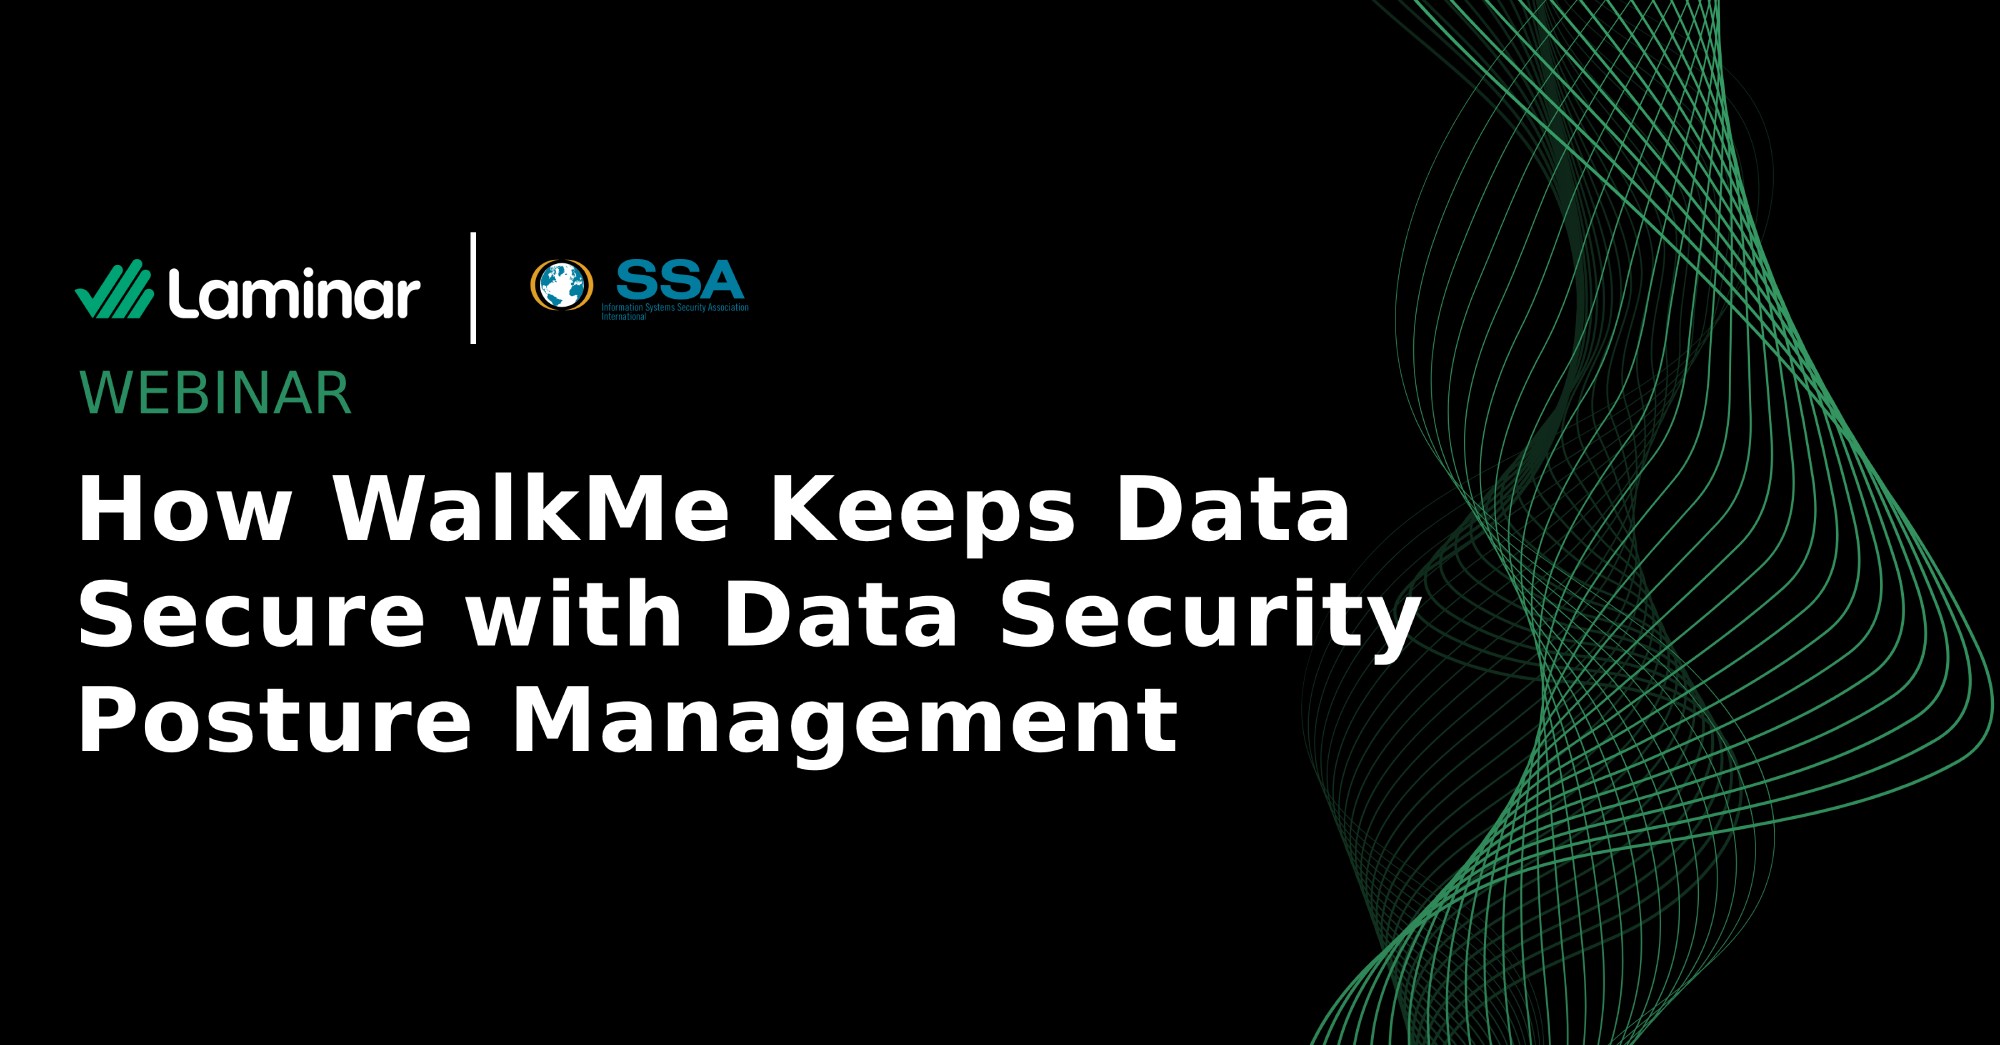 How WalkMe Keeps Data Secure with Data Security Posture Management